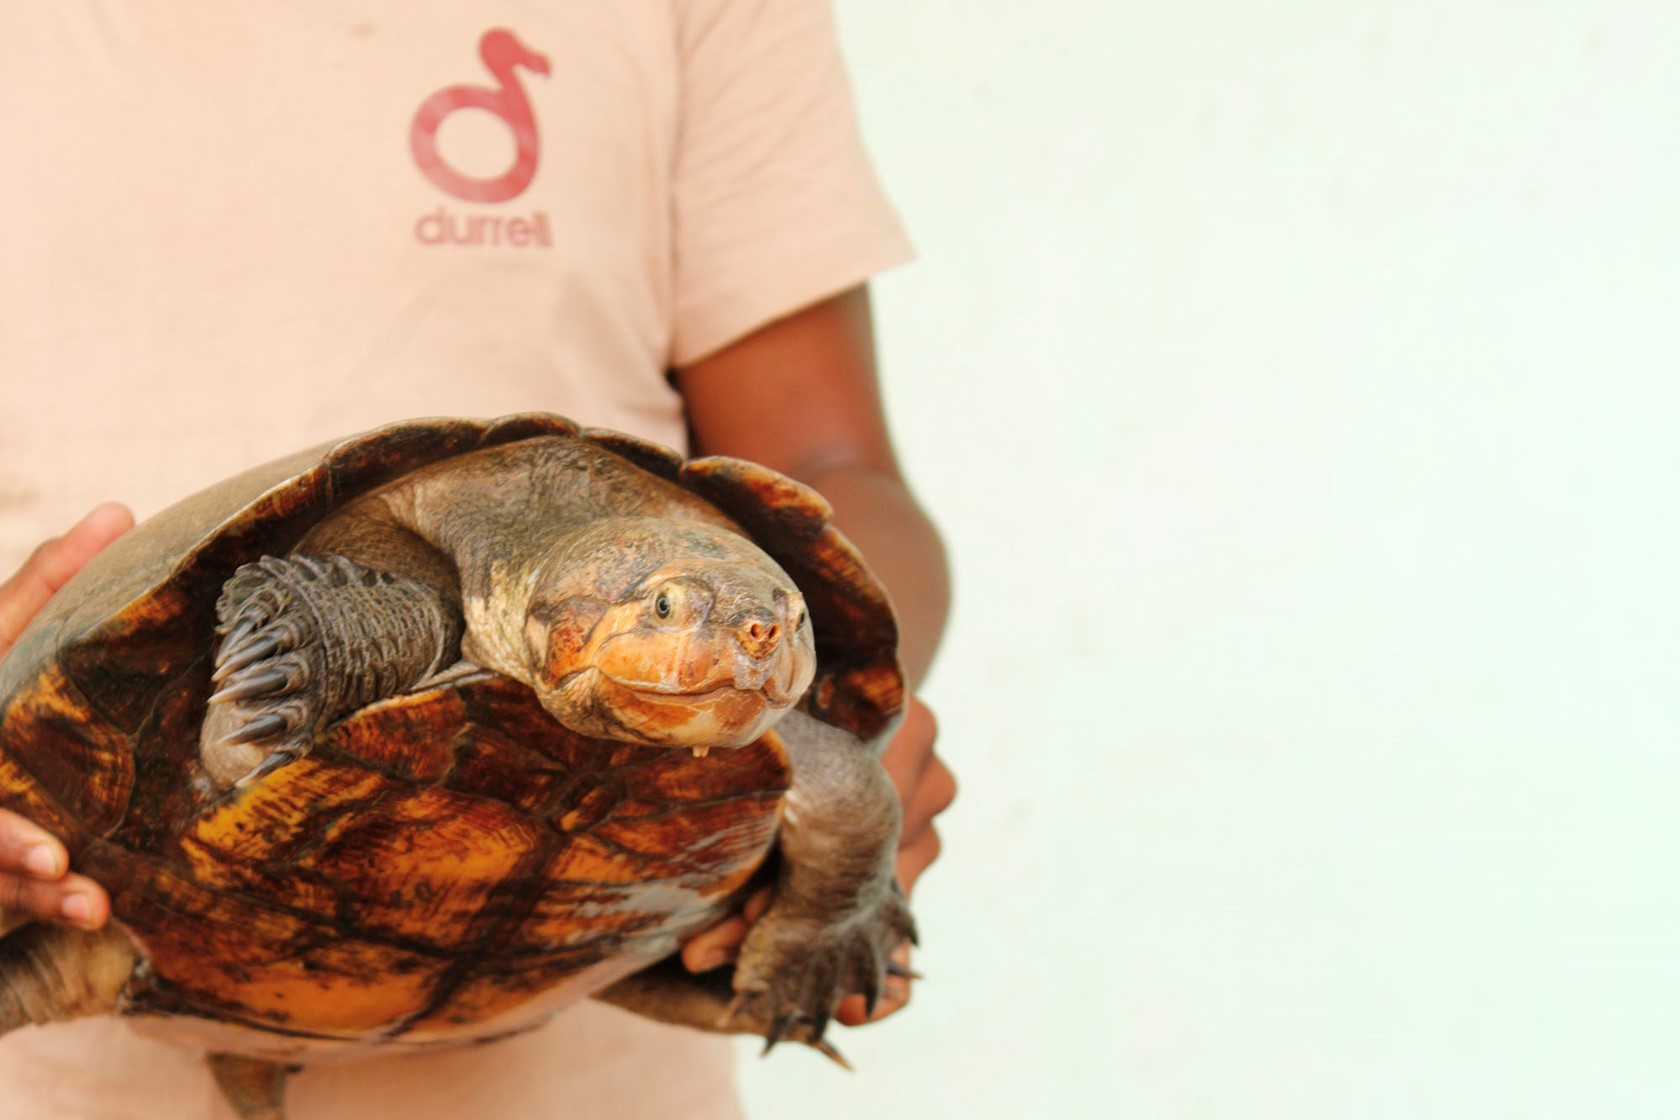 Durrell's Rere Turtle Conservation Project in Madagascar